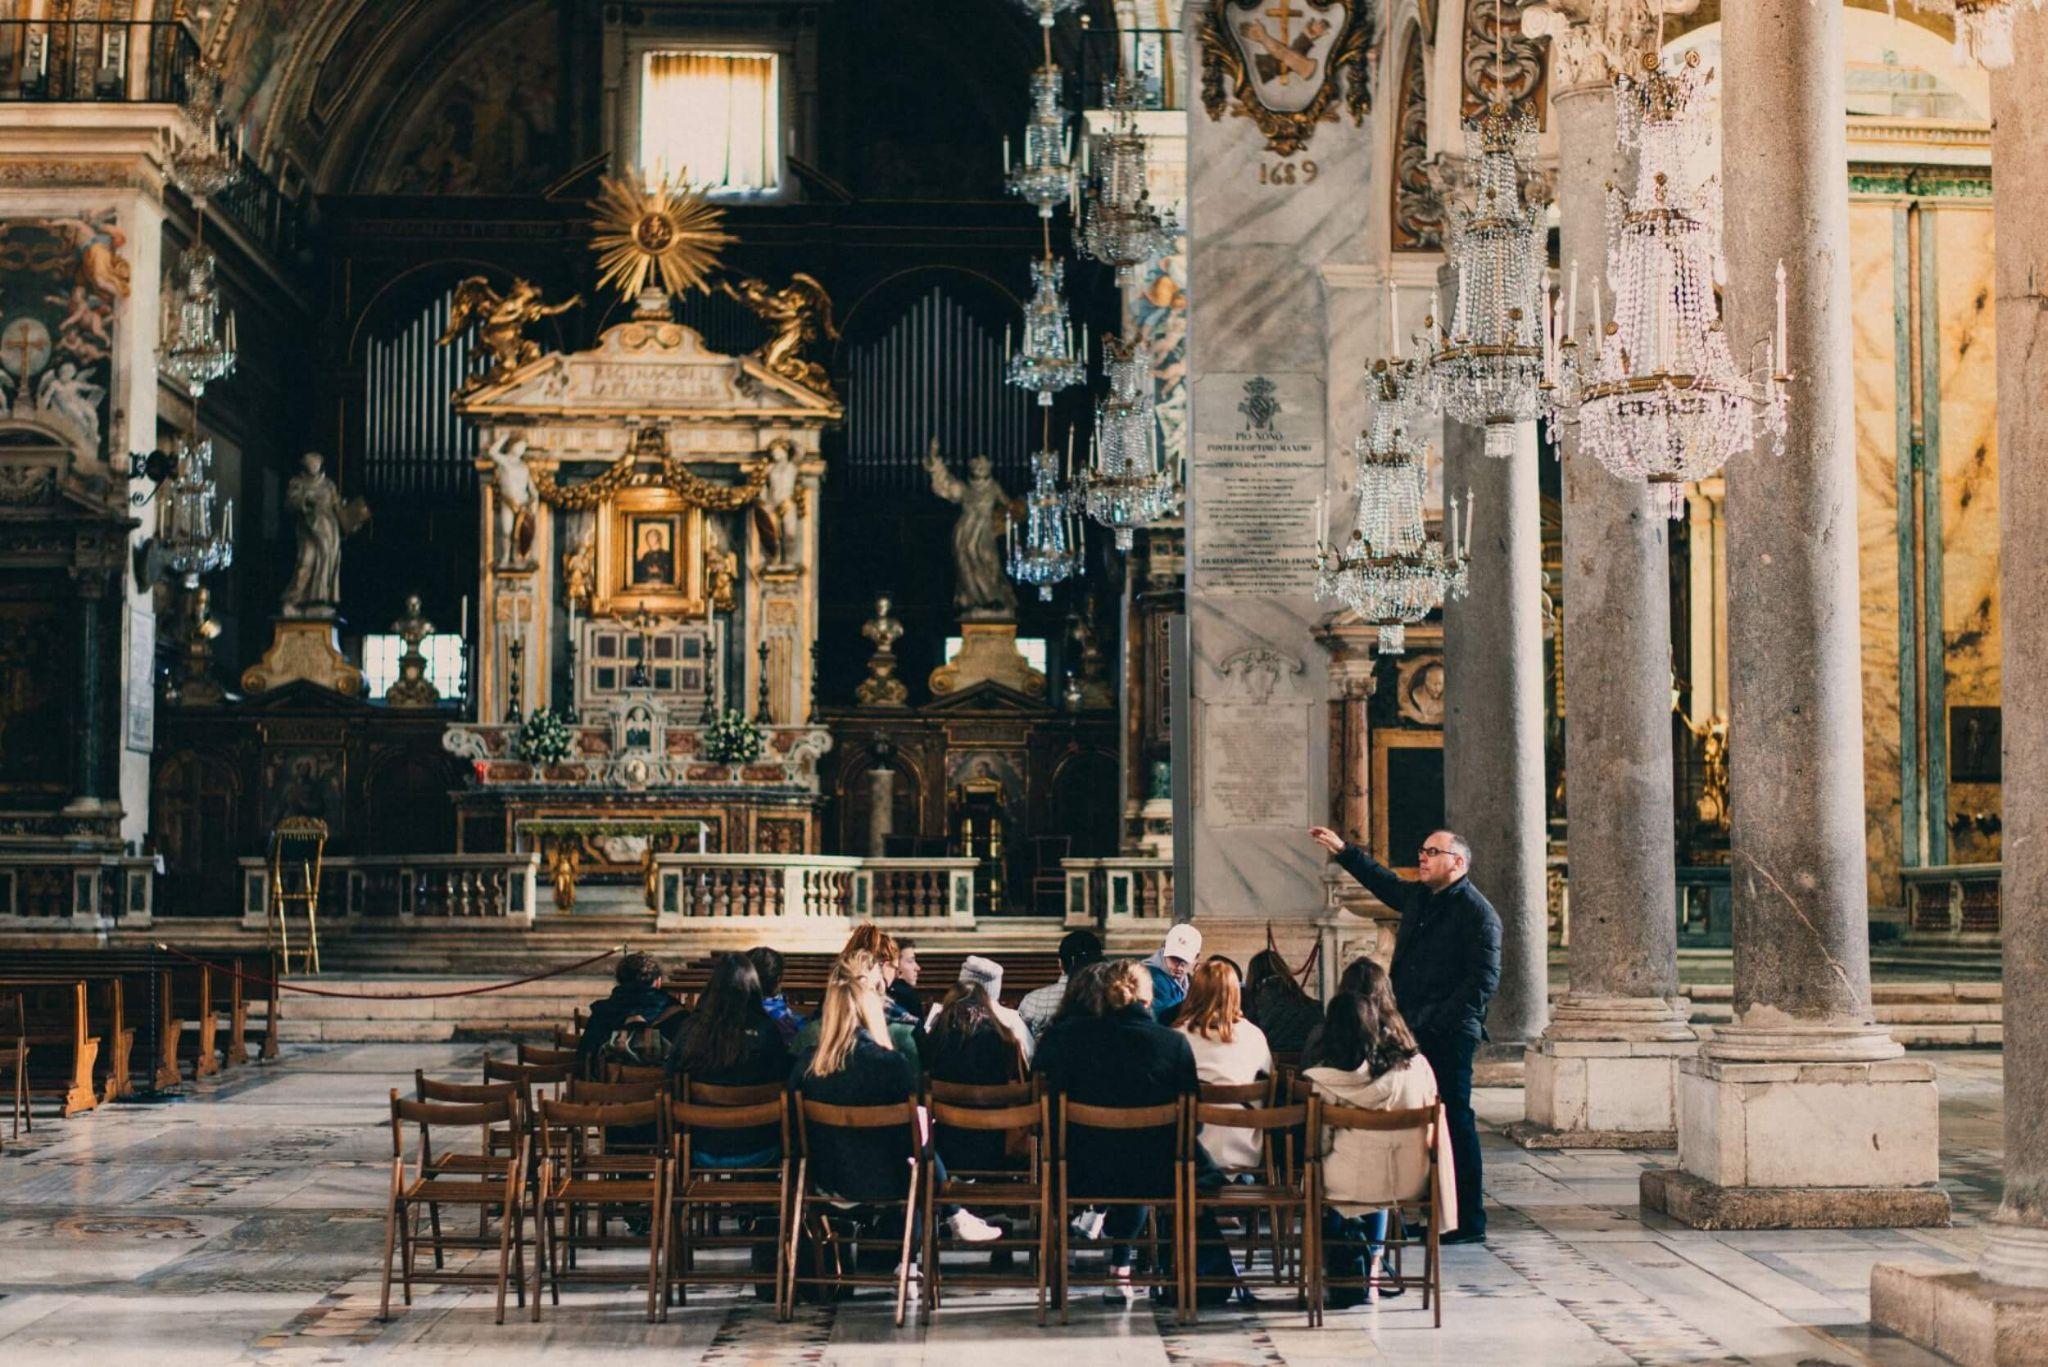 A class of students attending university in Rome listening to a lecture in an old church